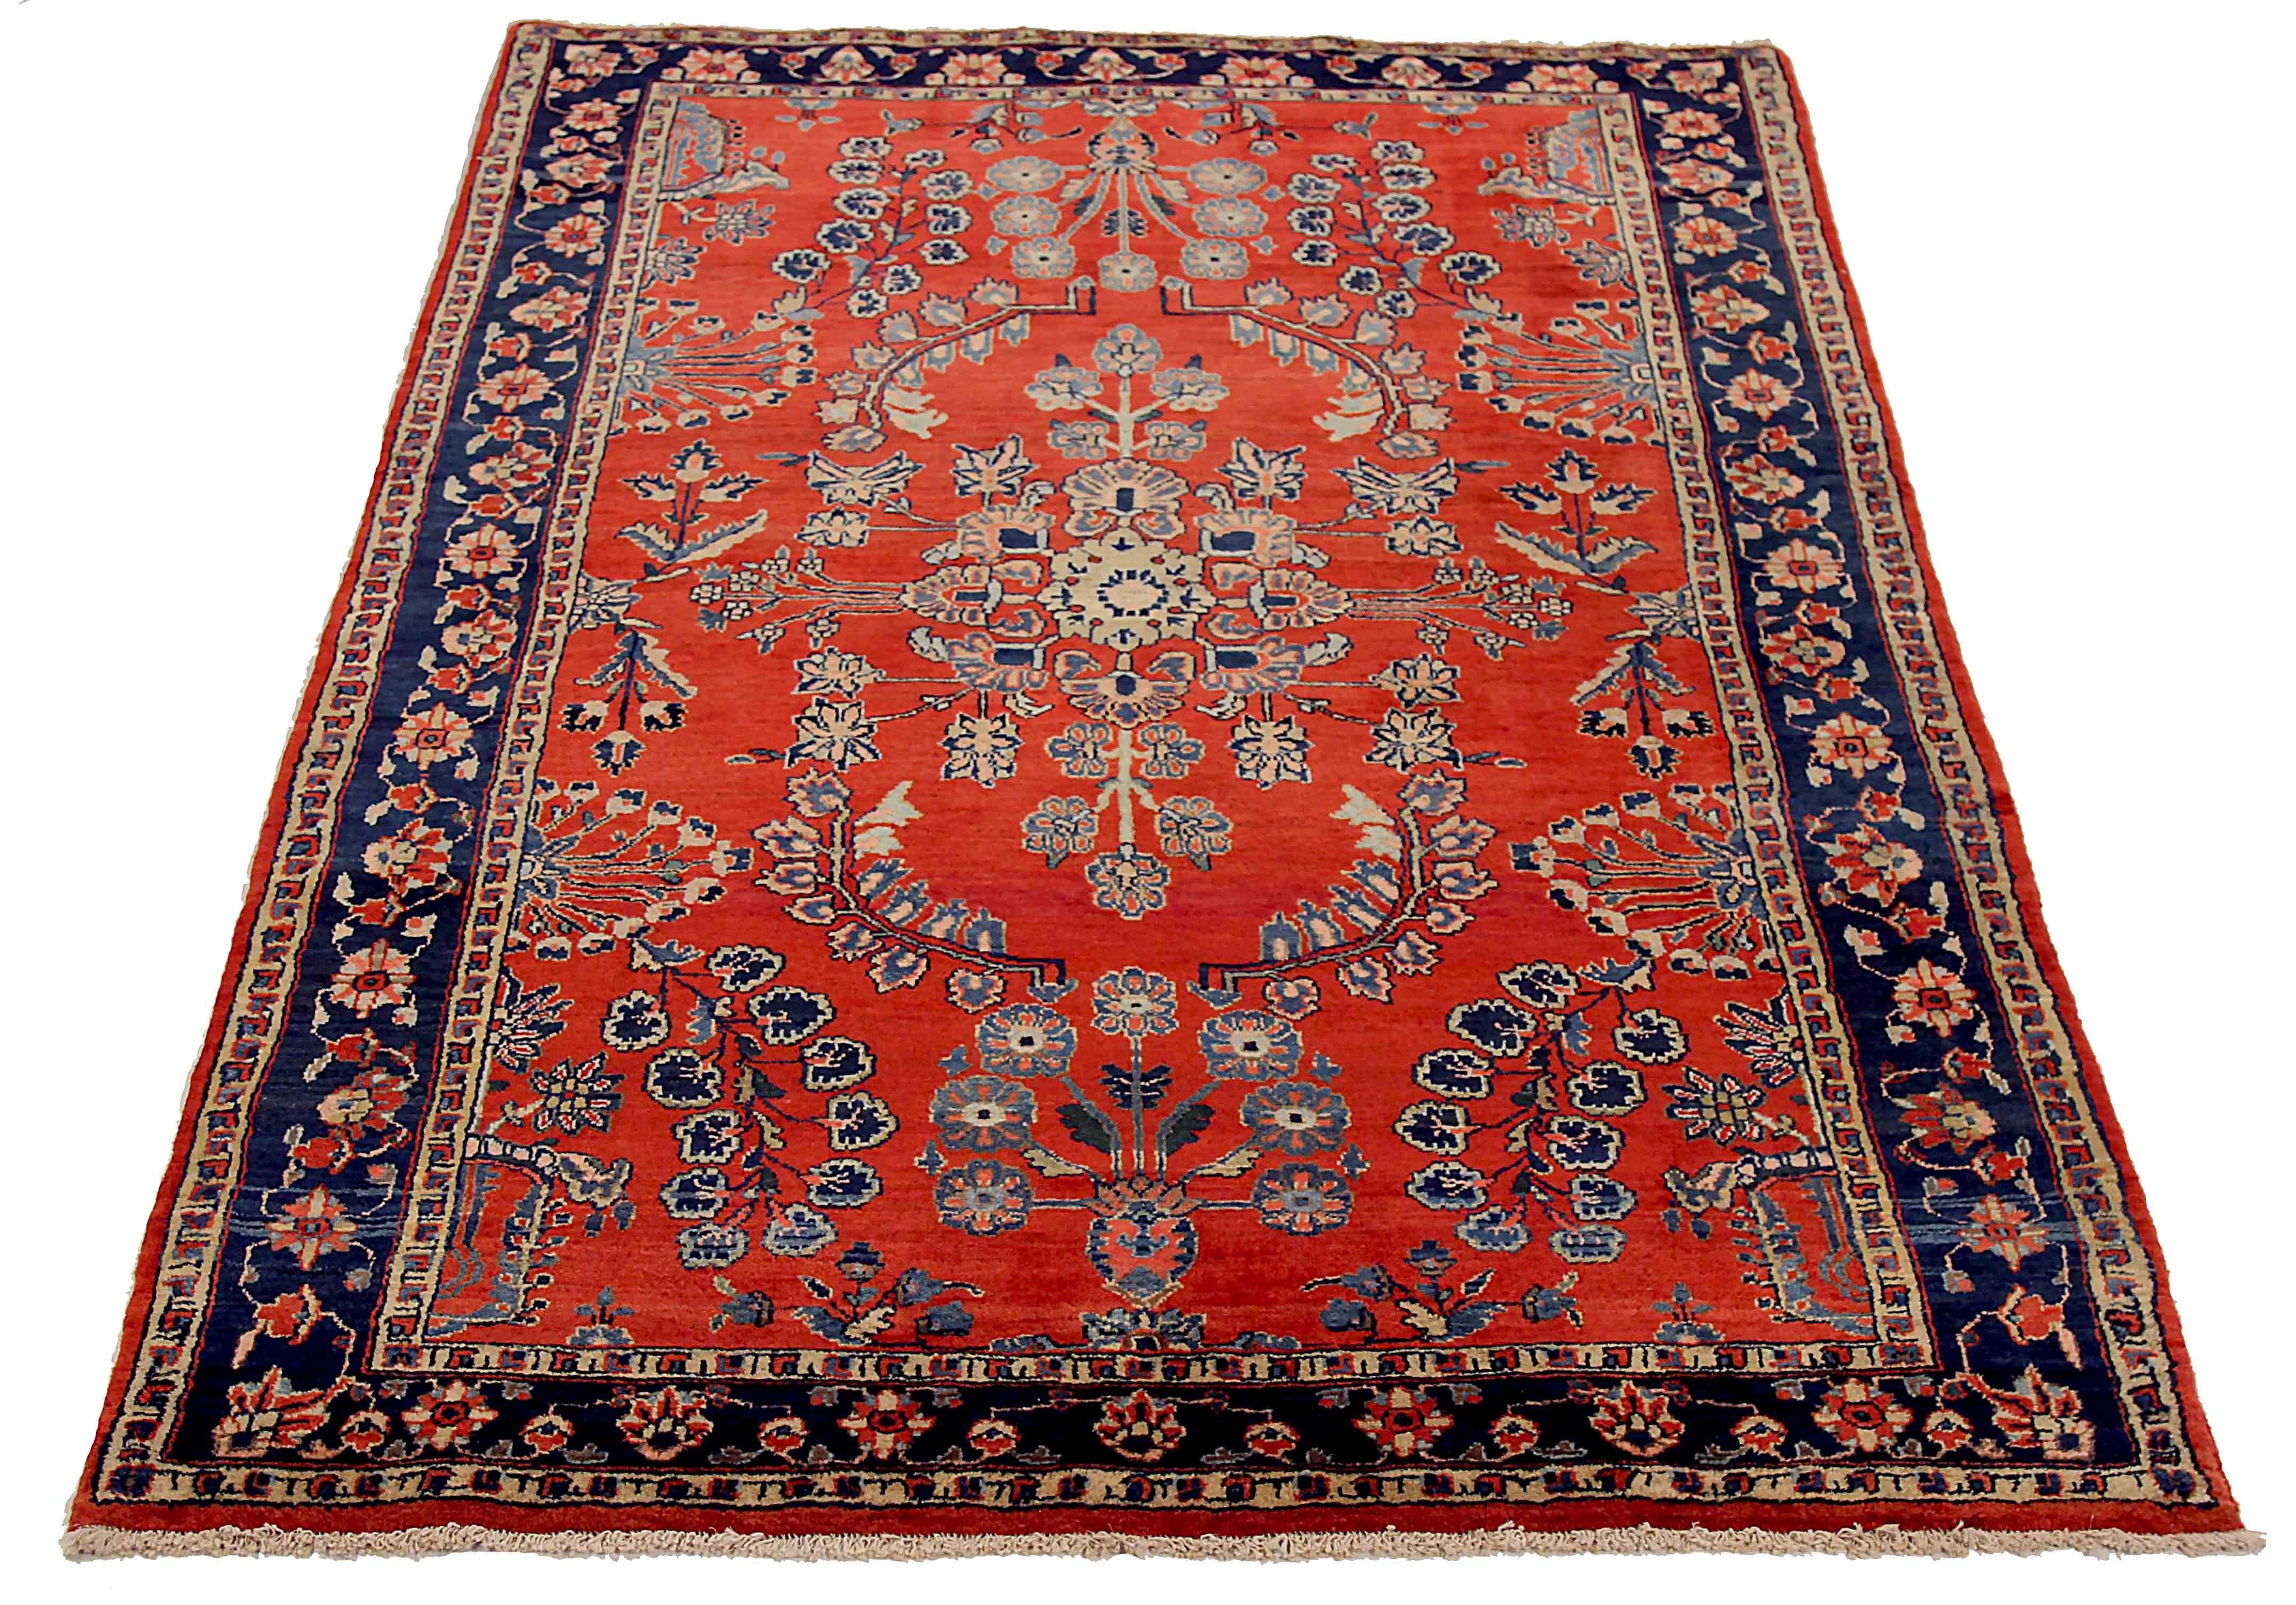 Antique Persian area rug handwoven from the finest sheep’s wool. It’s colored with all-natural vegetable dyes that are safe for humans and pets. It’s a traditional Sarouk design handwoven by expert artisans. It’s a lovely area rug that can be